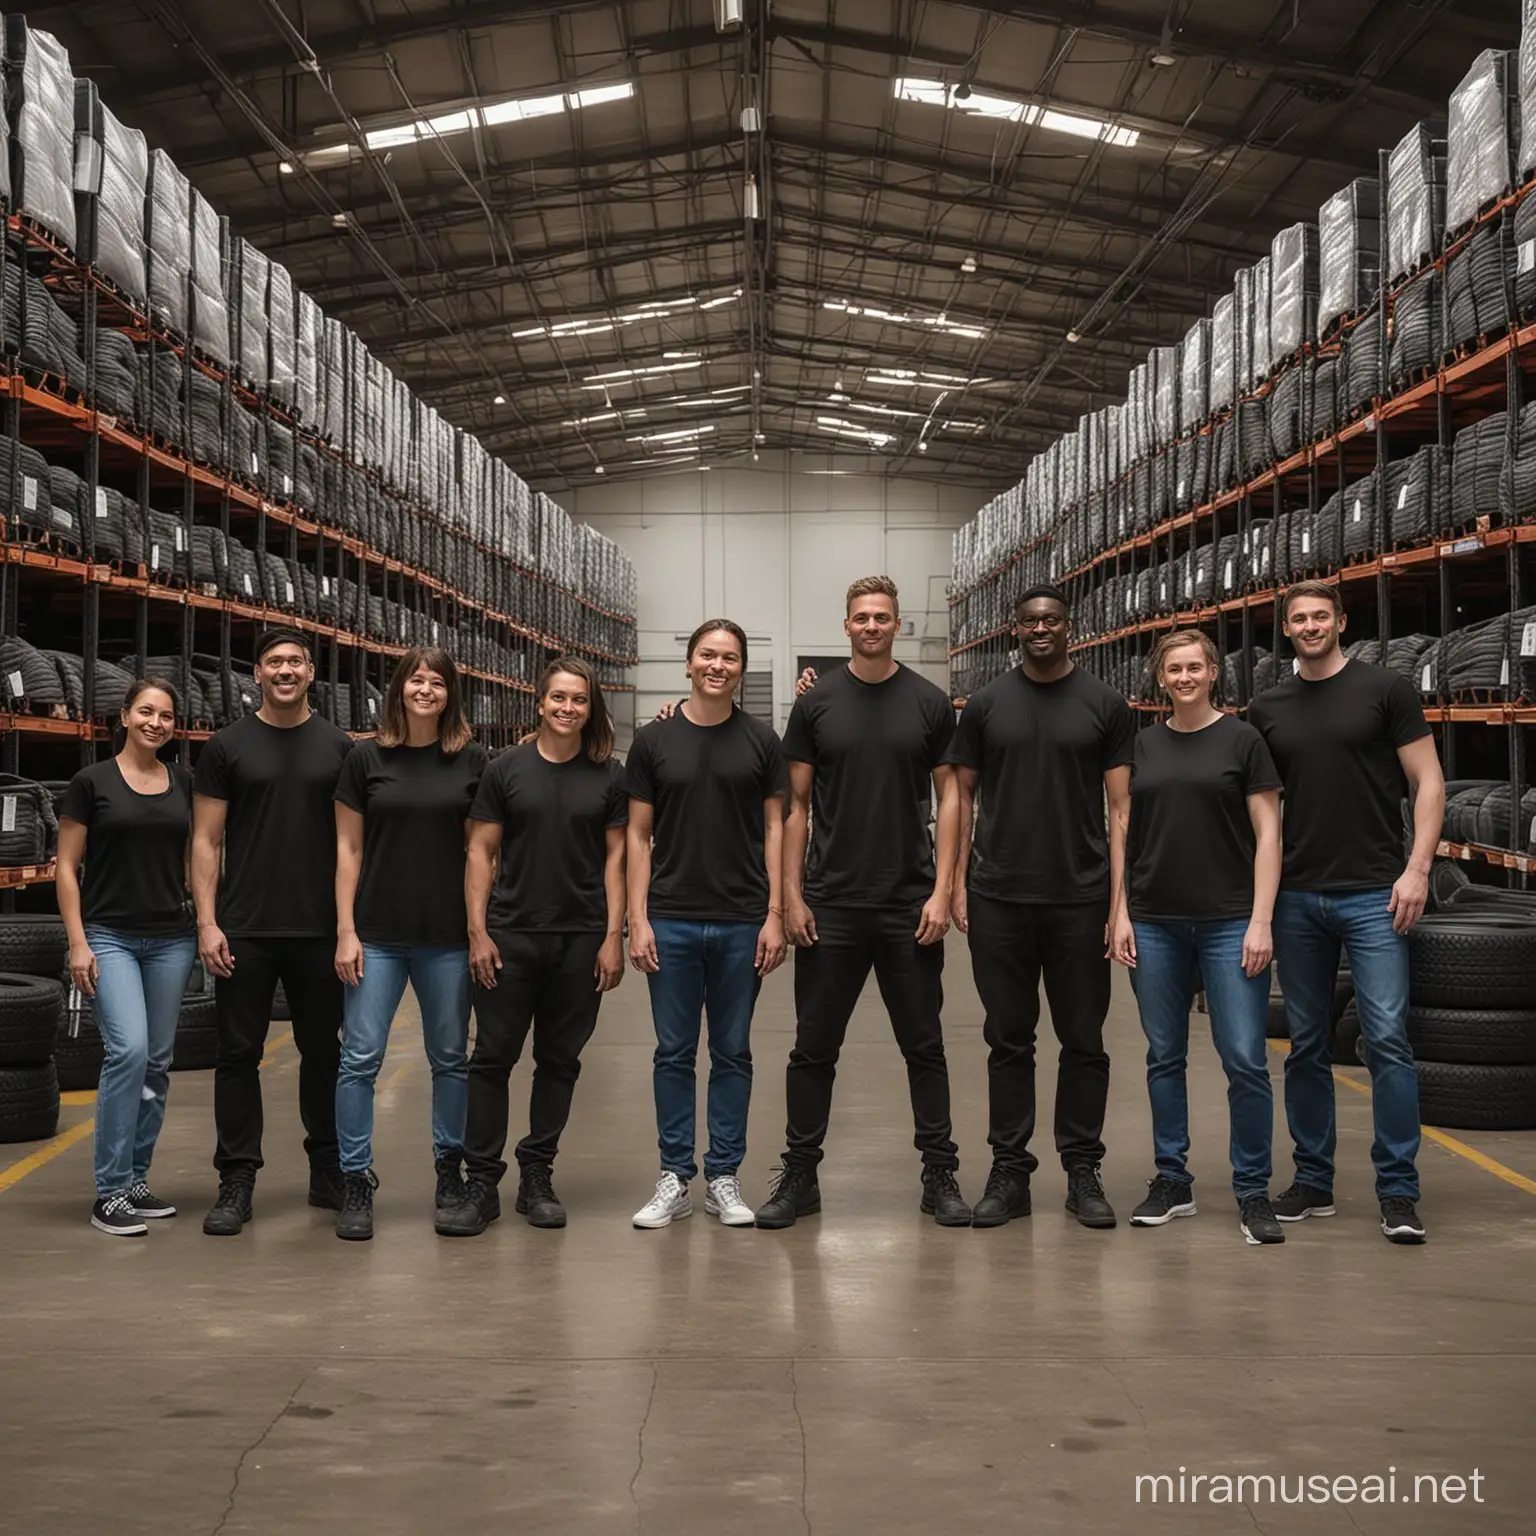 Diverse Team Standing in Tire Warehouse Wearing Blank Black TShirts